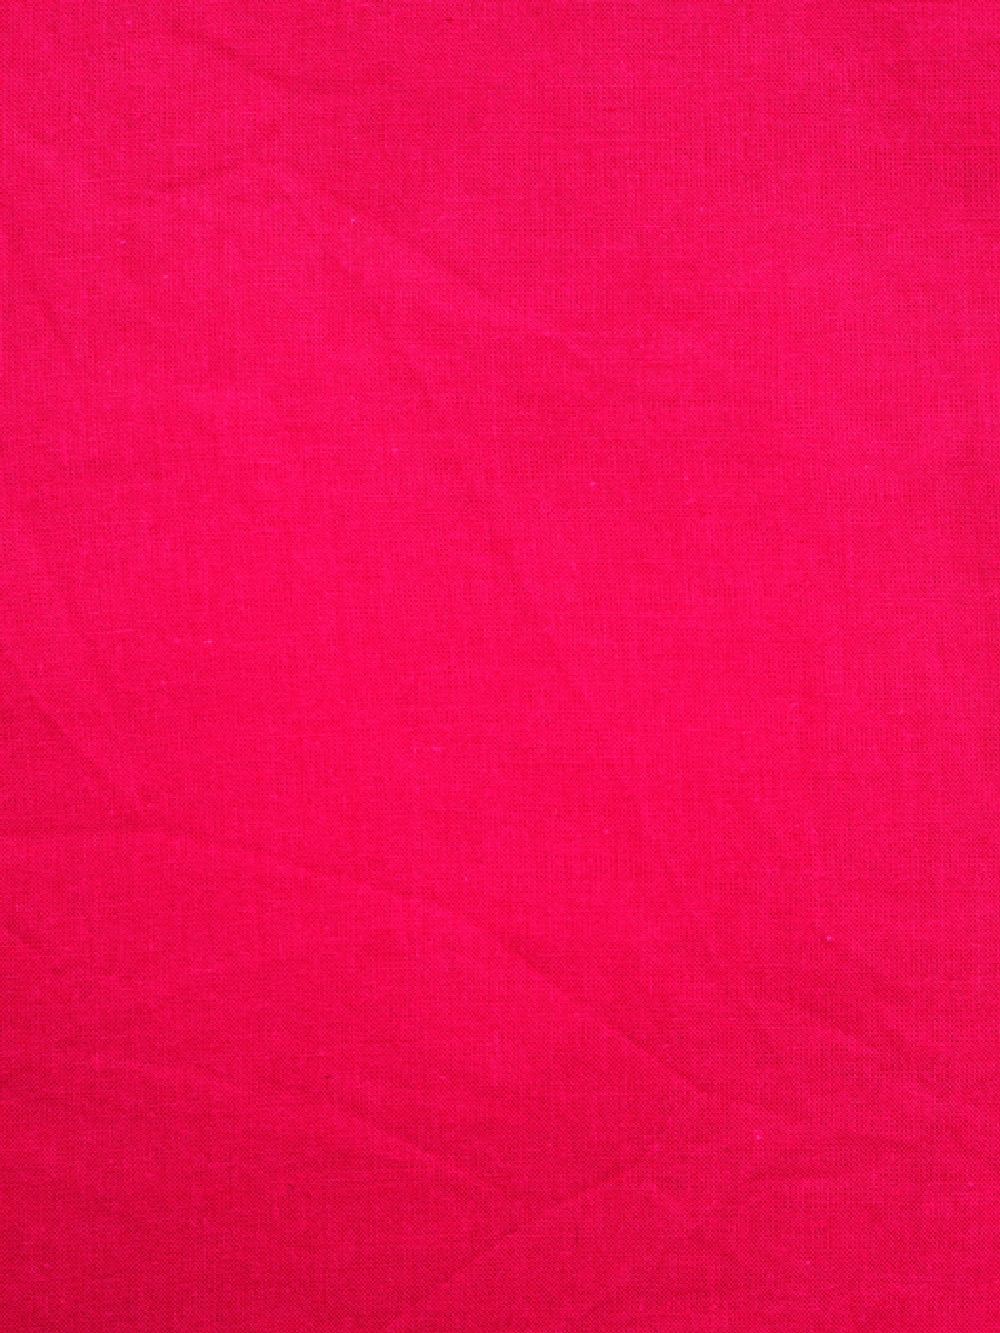 C-2 Pink Shade Solid Dyed Cotton Cambric Fabric